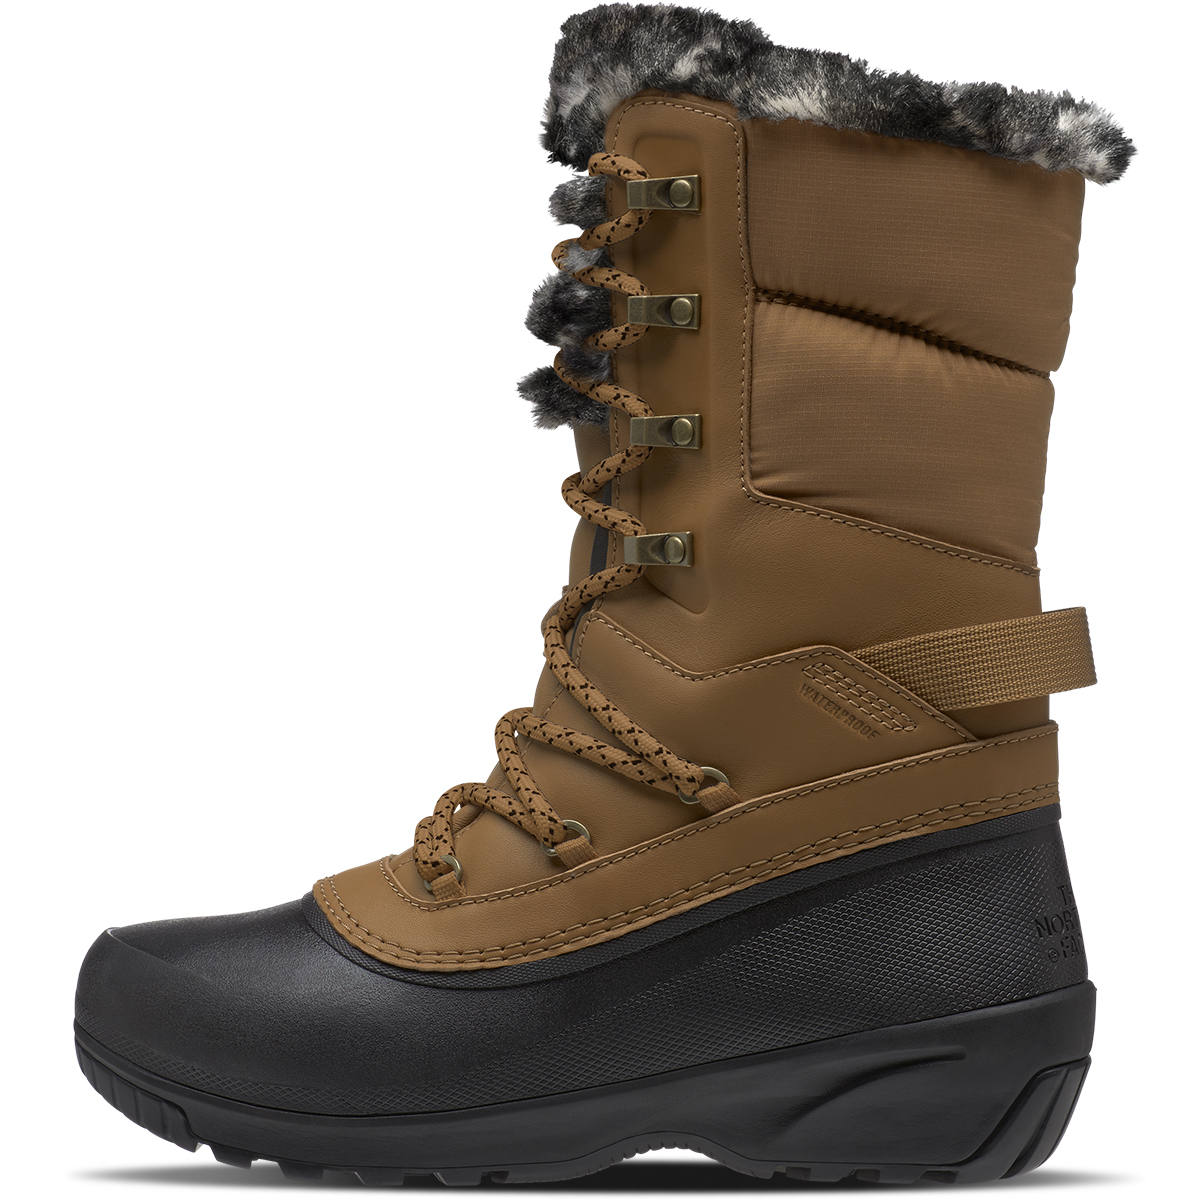 The North Face Women's Shellista Iv Luxe Waterproof Boots - Size 10